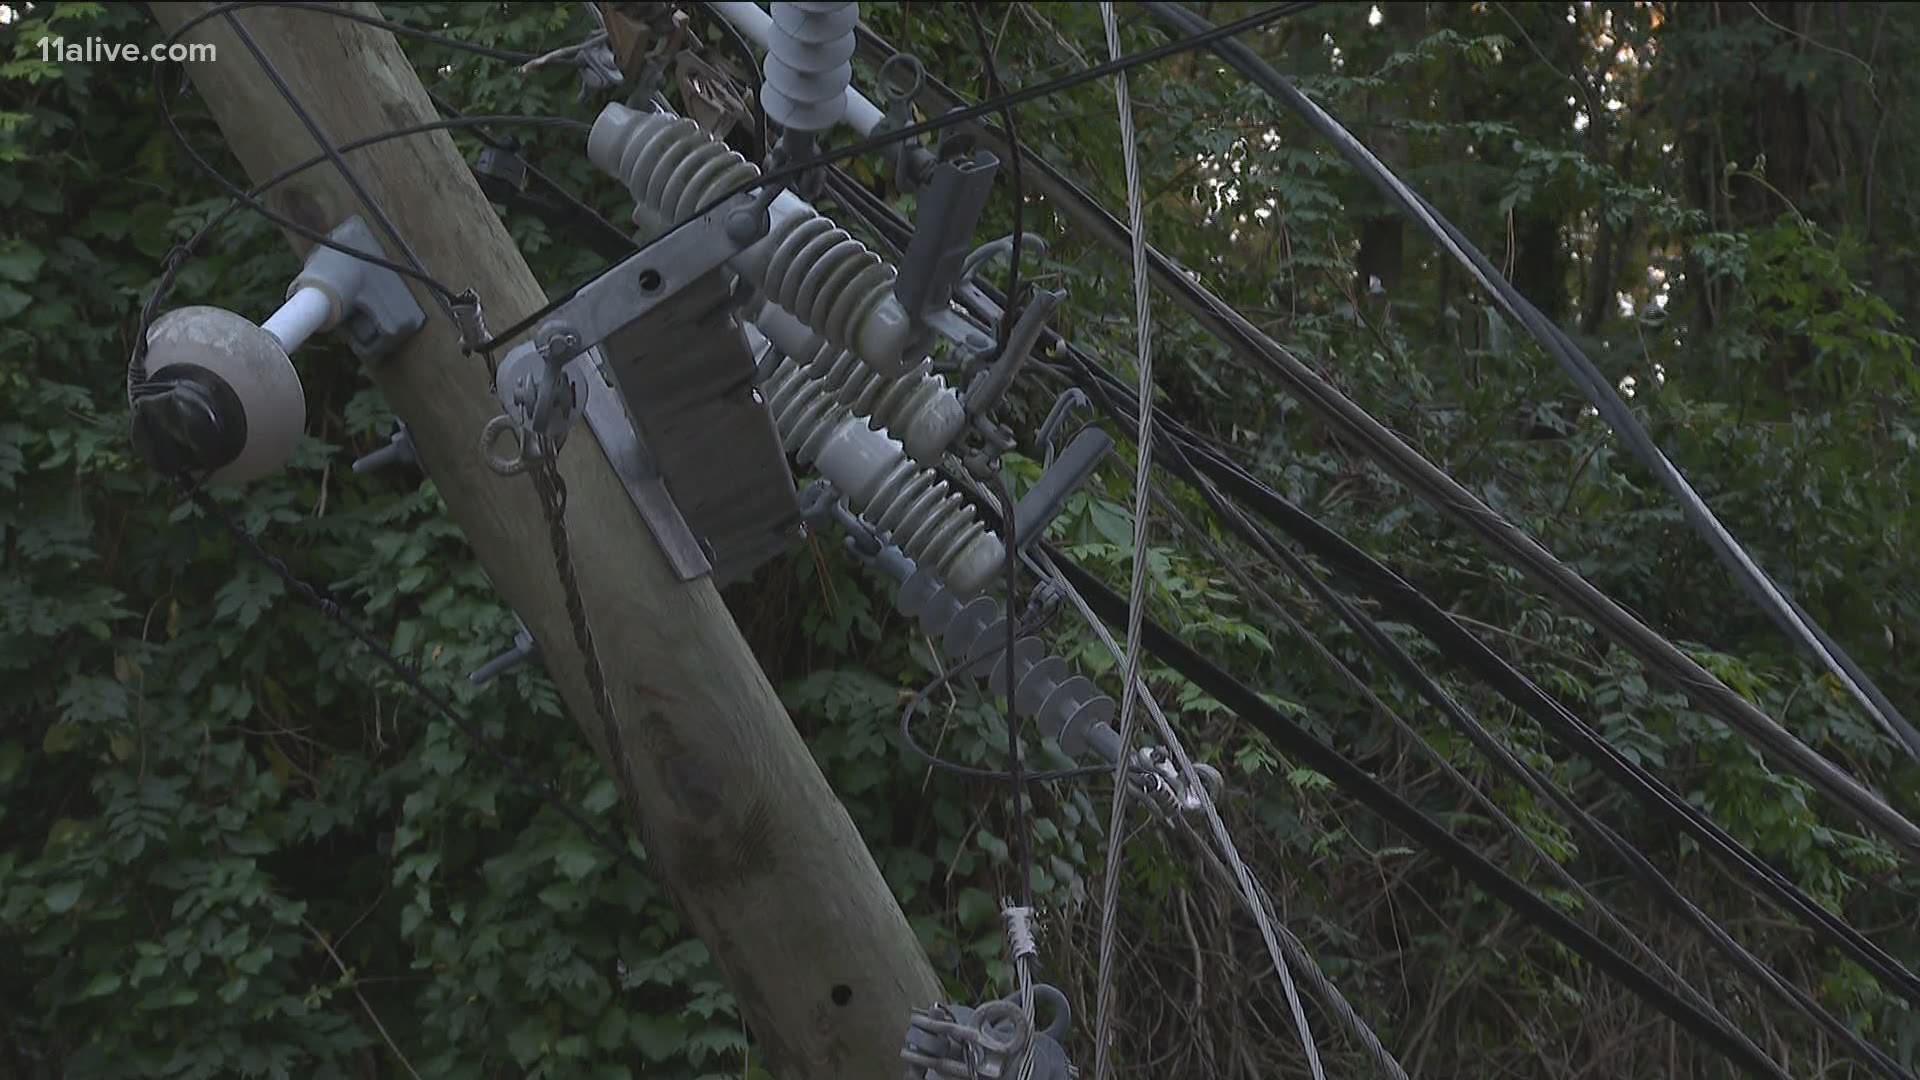 Thousands of power poles snapped in the storm.